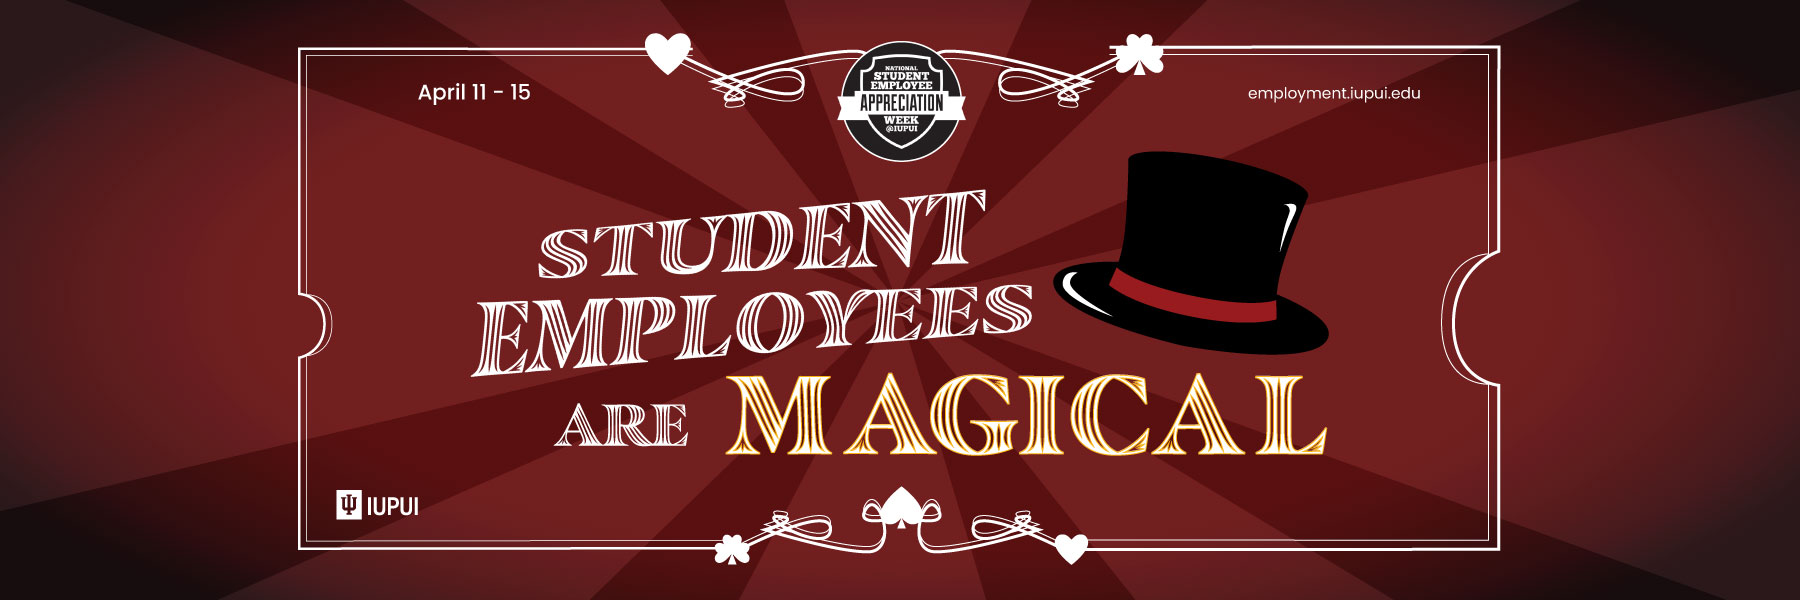 A dark crimson design that says Student Employees are Magical, promoting National Student Employee Appreciation Week April 11-15.